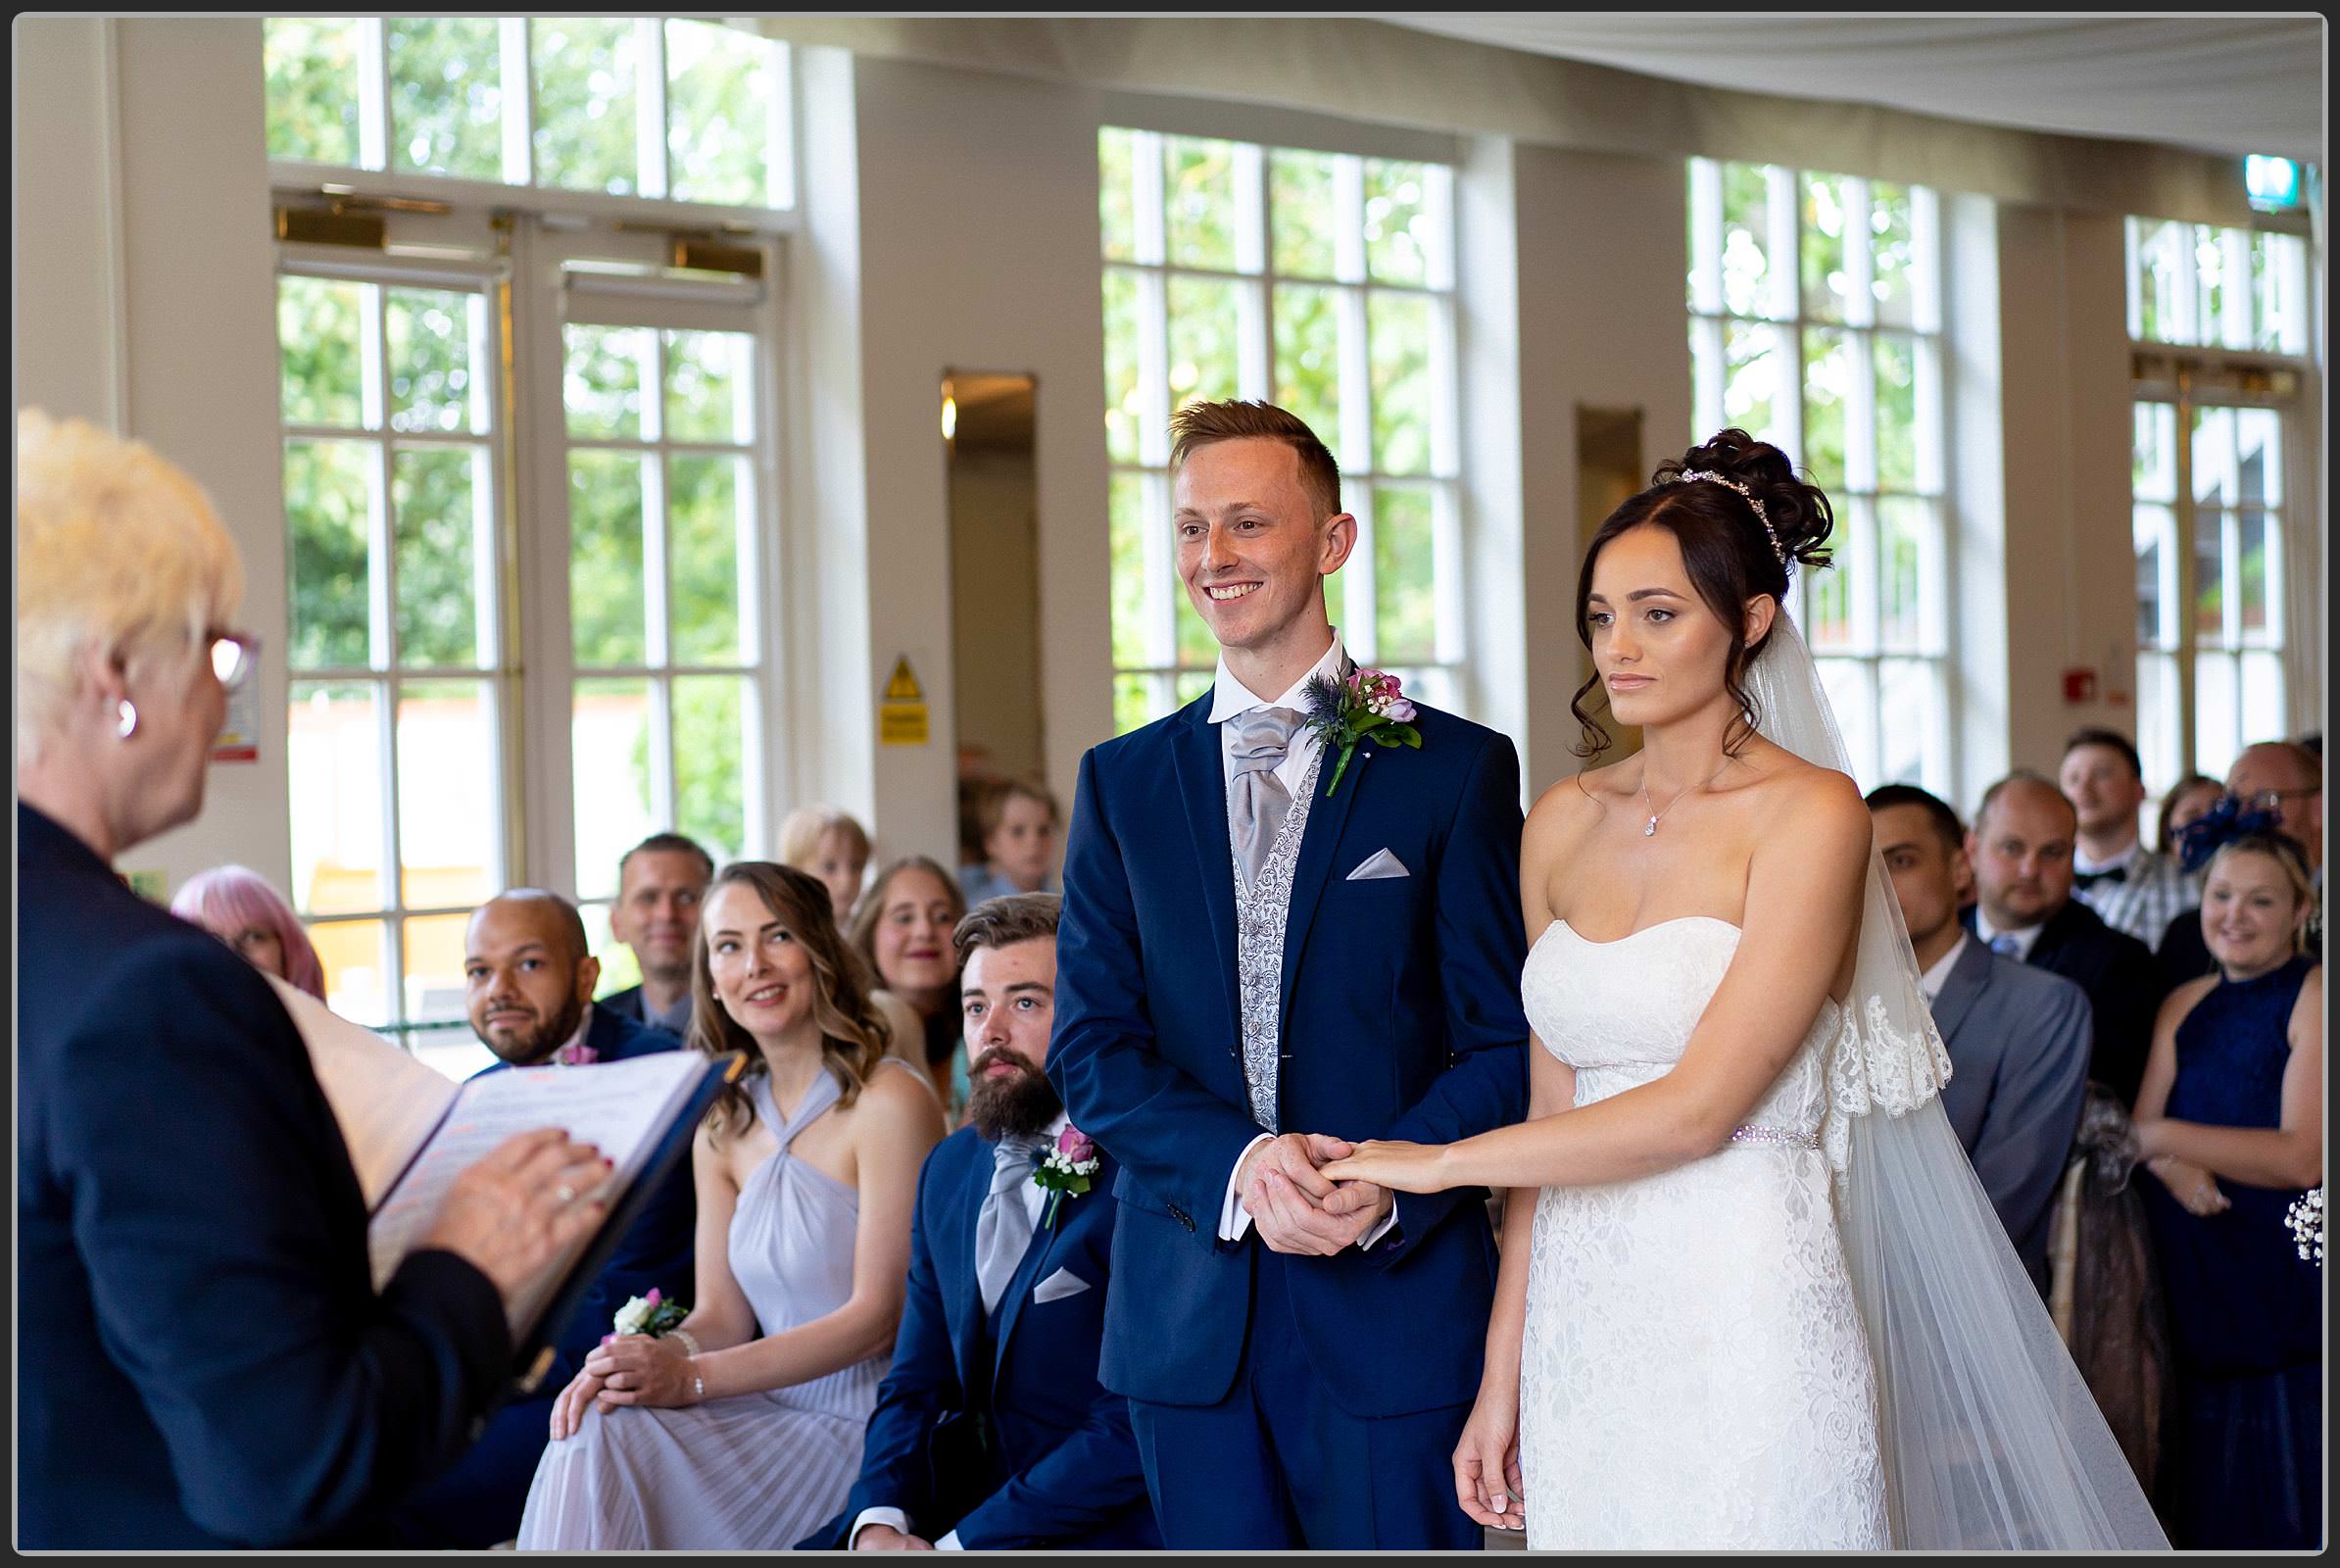 The Bride and Groom during the ceremony at Warwick House